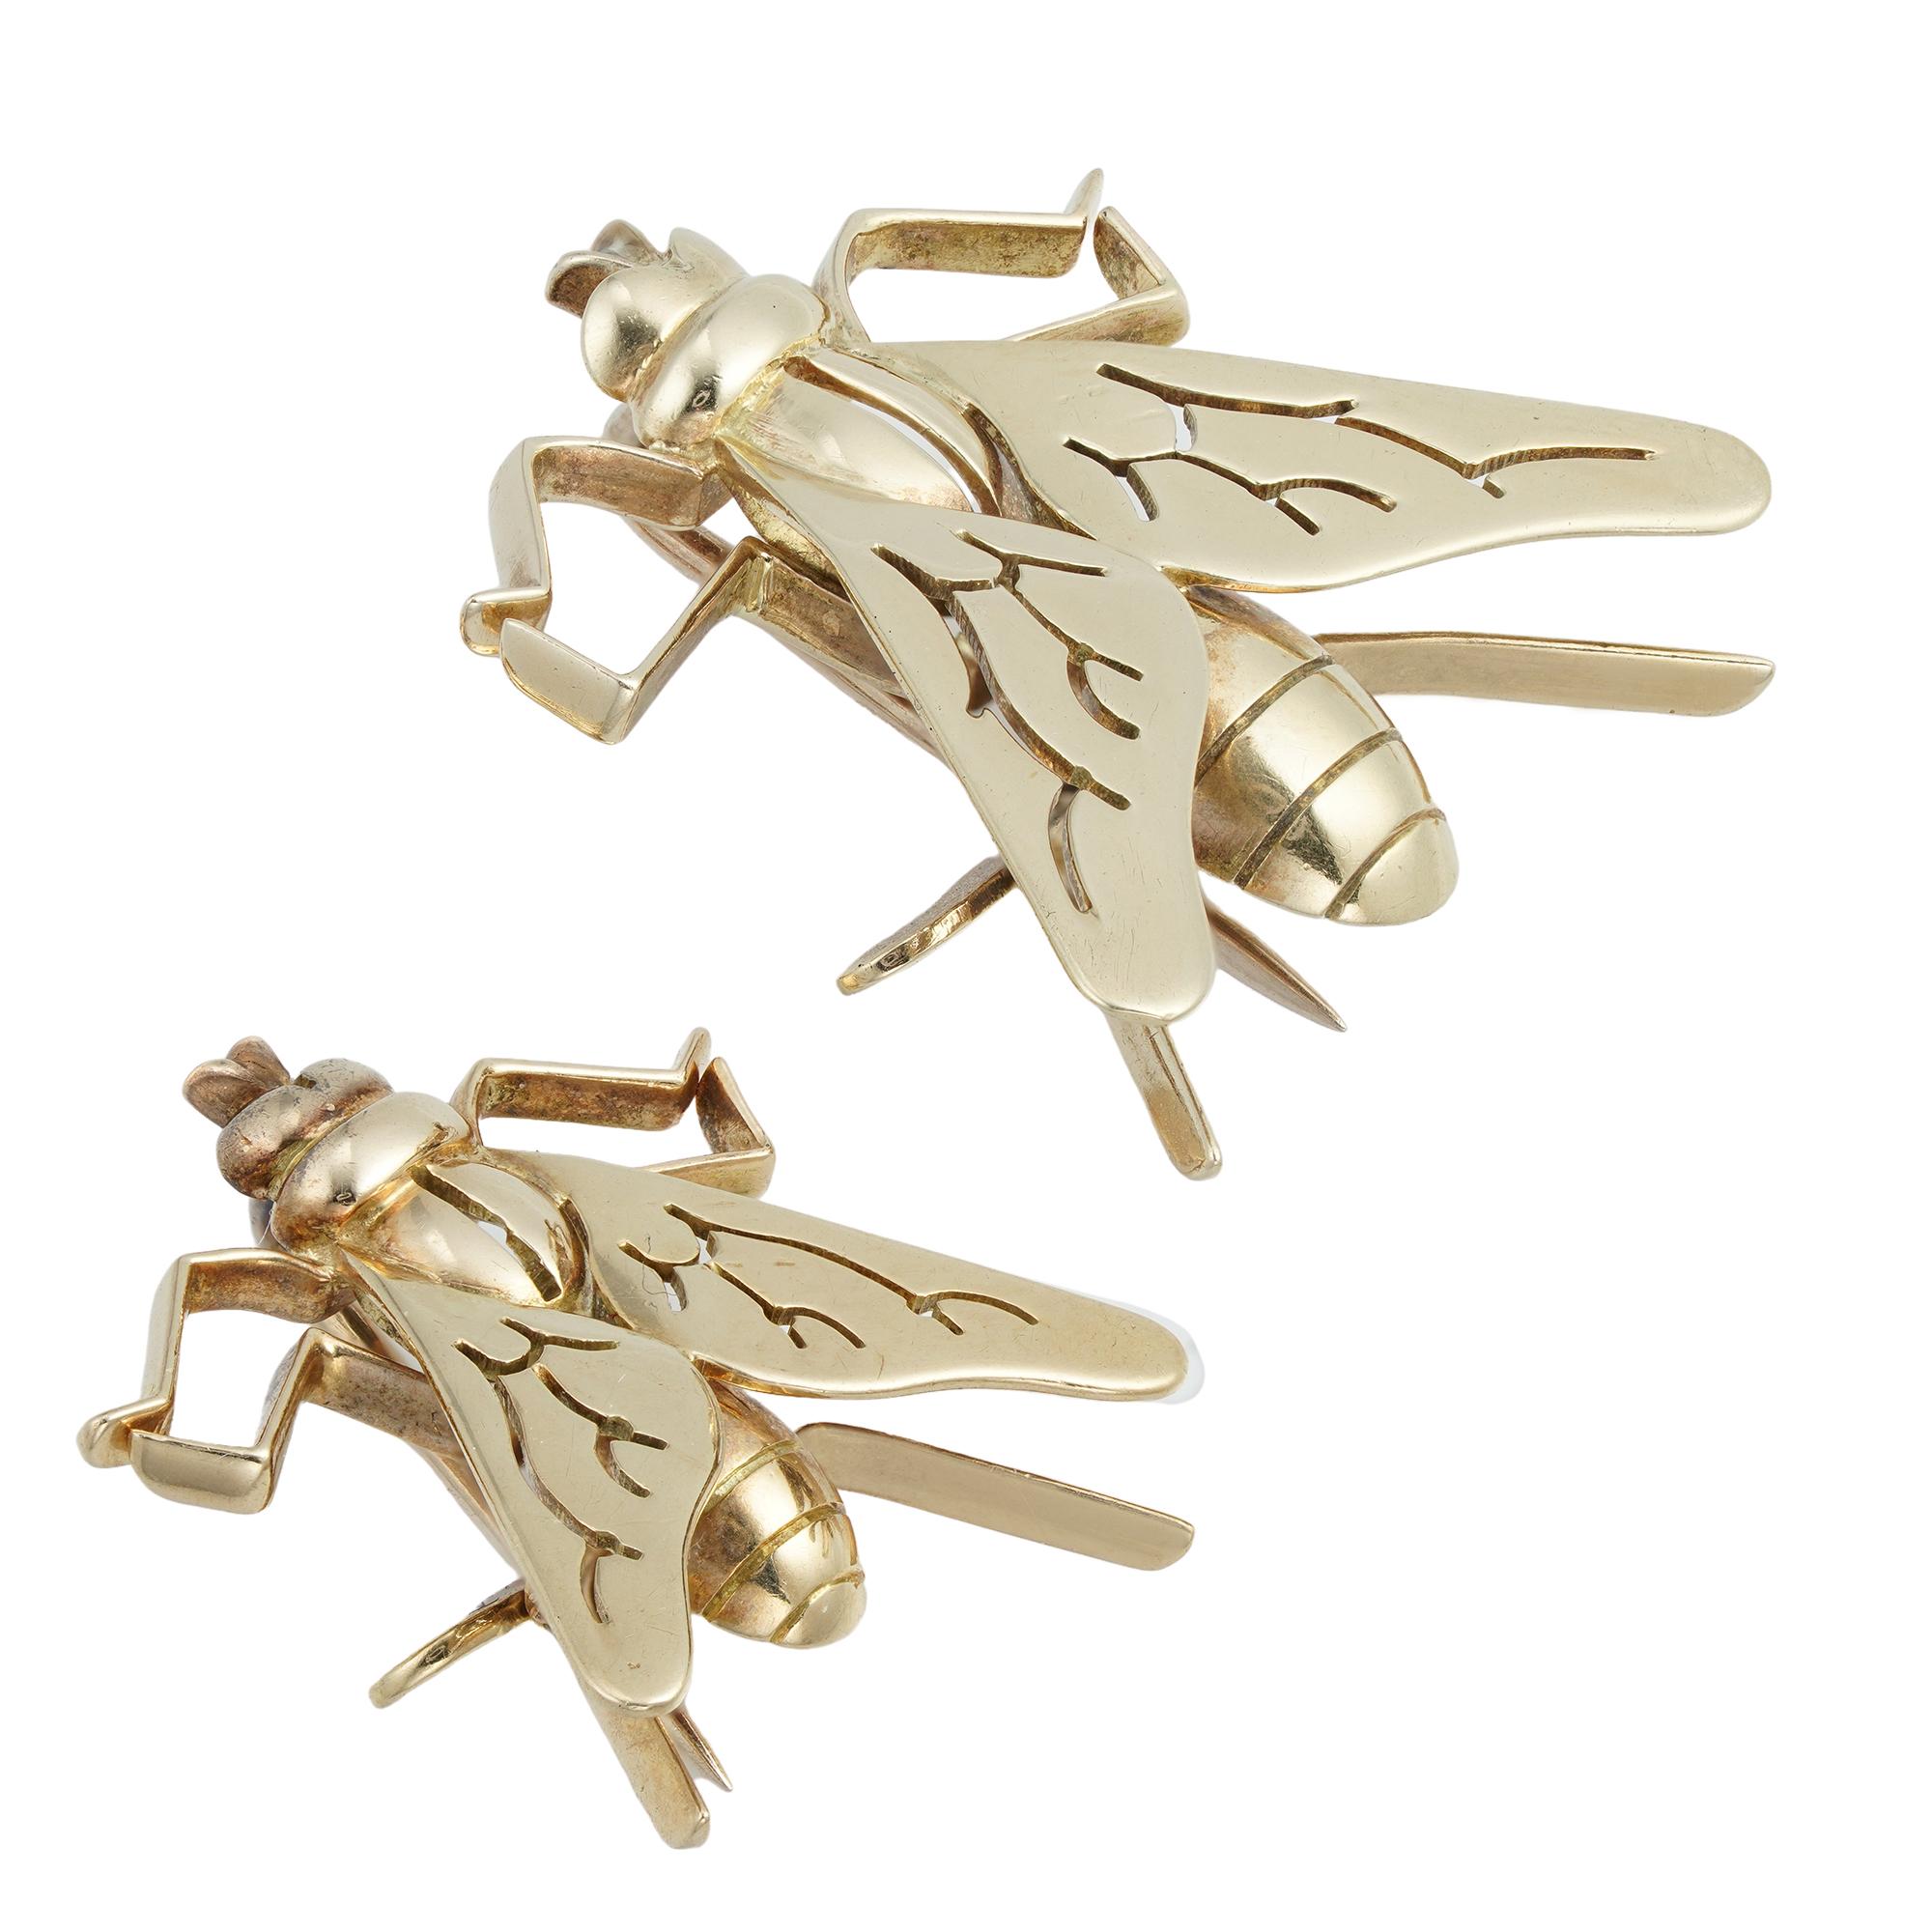 A pair of yellow gold fly insect brooches, the larger measuring approximately 2.2 x 2.2cm, signed Boucheron London, the smaller measuring approximately 1.7 x 1.9 cm, circa 1960, gross weight 4.8 grams, later hallmarked 9 carat gold, London.

Should